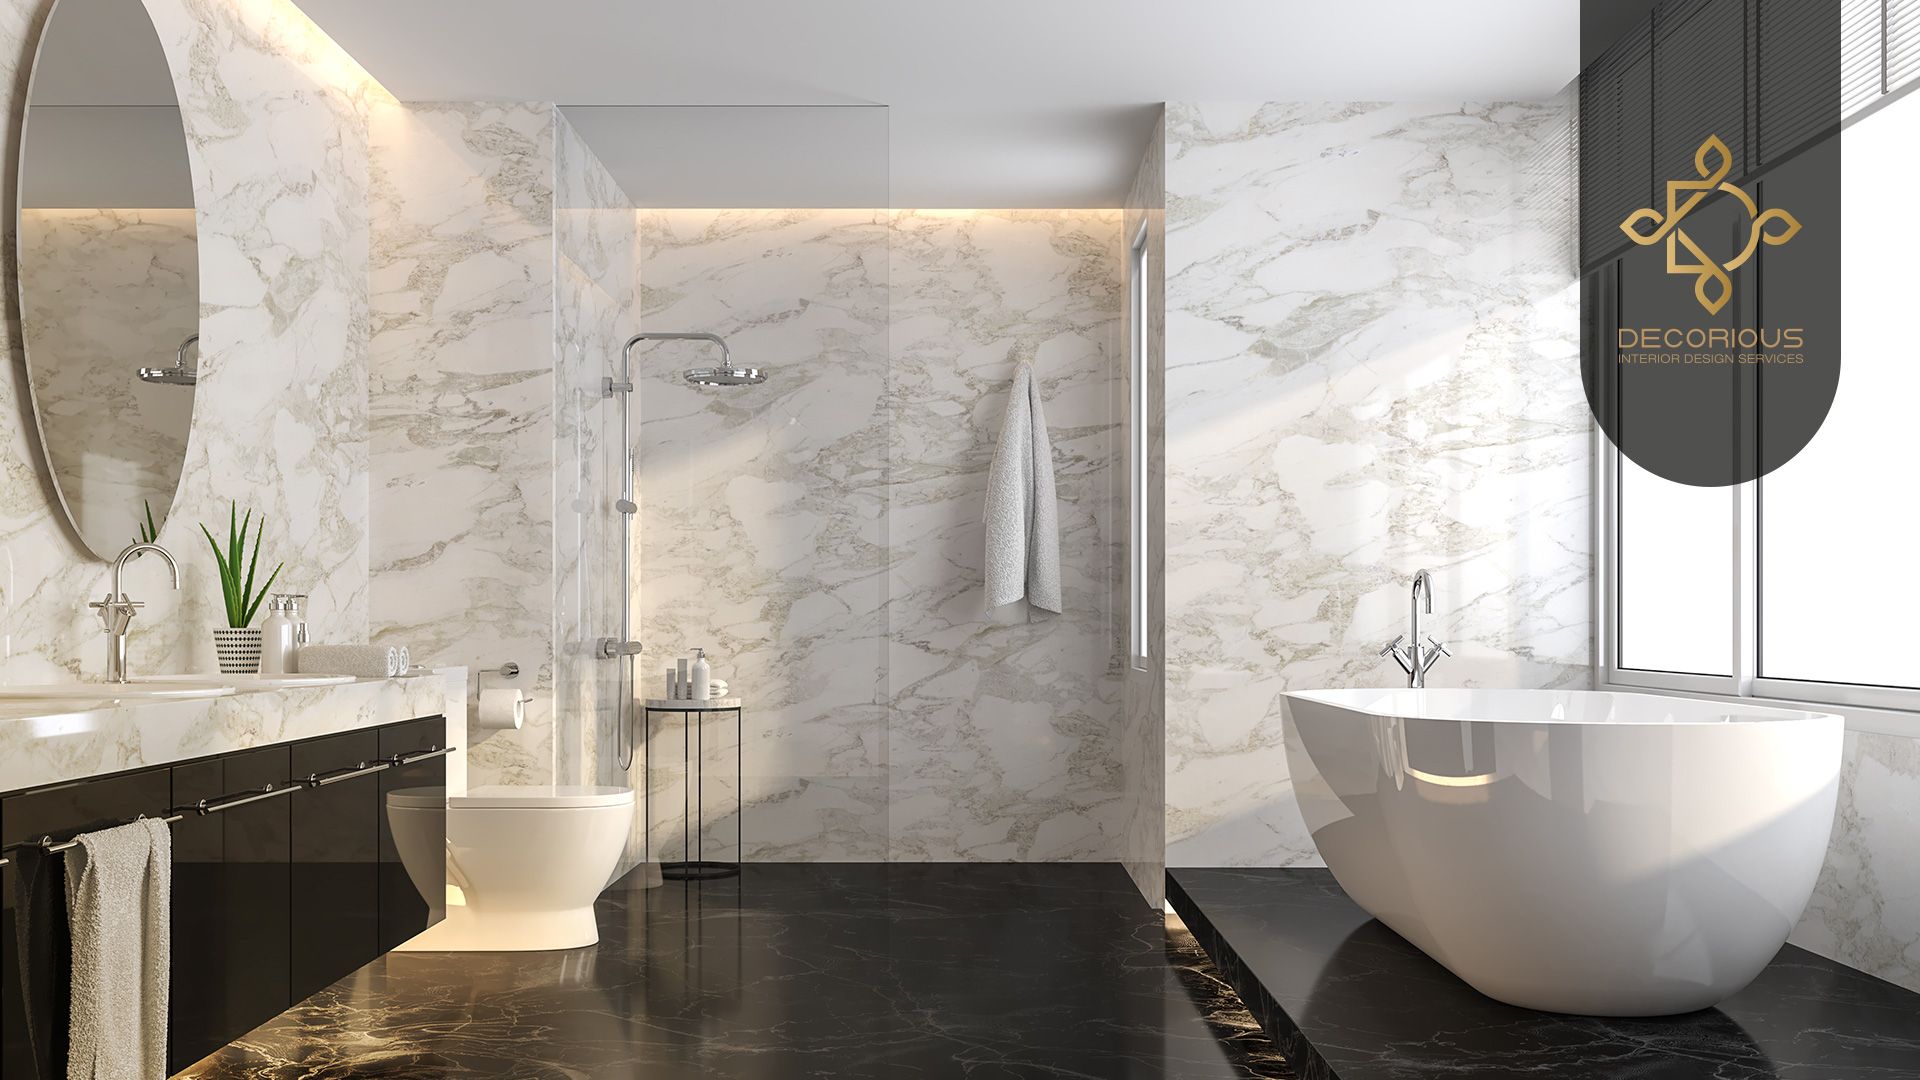 What Is the Best Way to Fit Tiles in Your Bathroom?